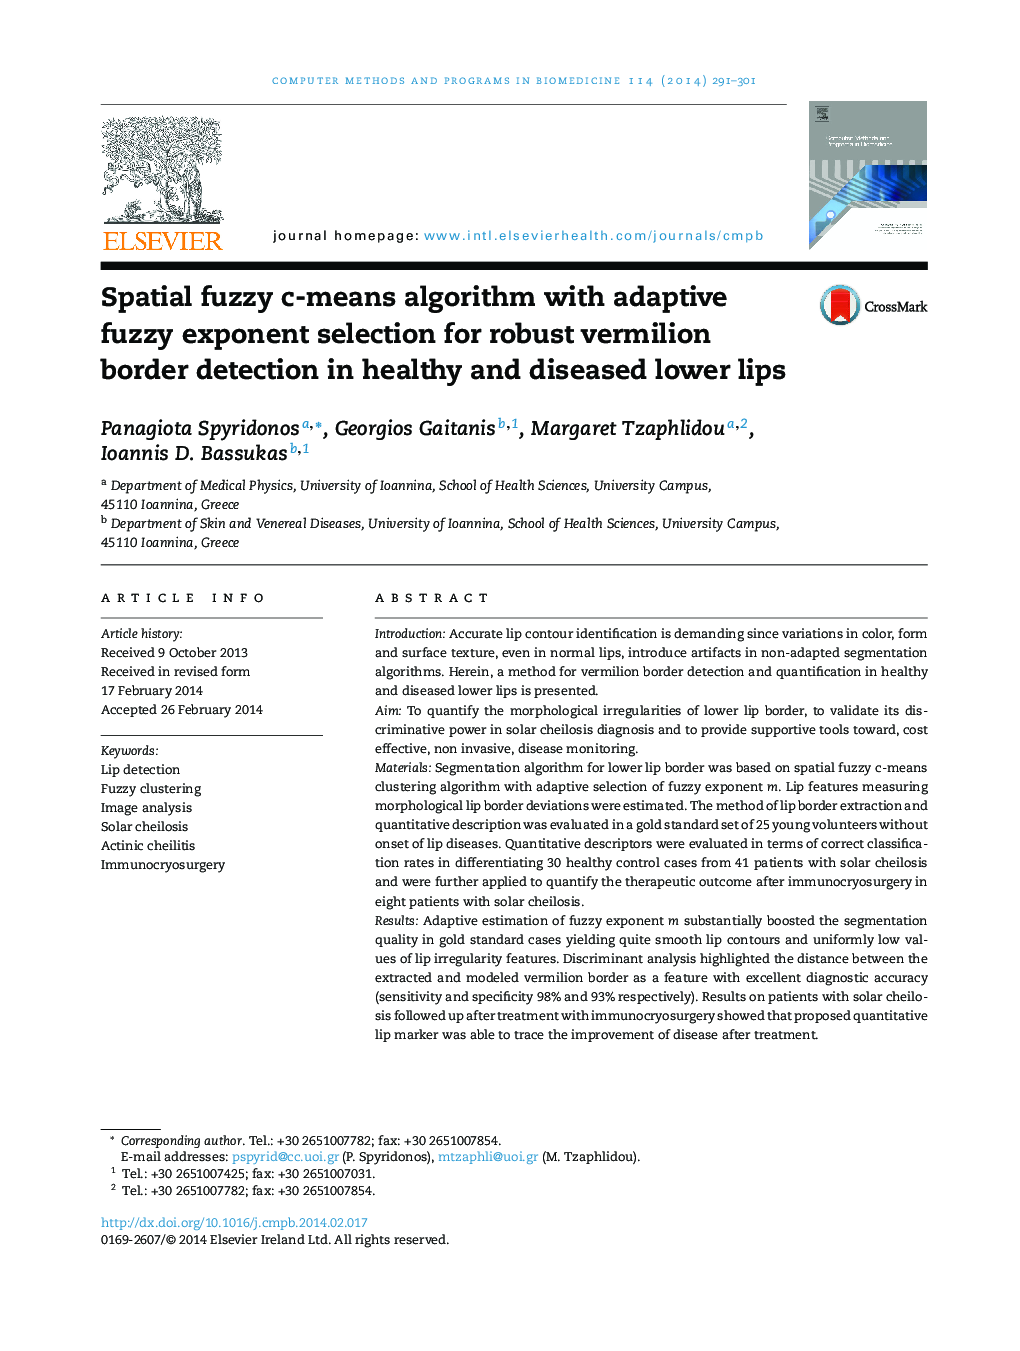 Spatial fuzzy c-means algorithm with adaptive fuzzy exponent selection for robust vermilion border detection in healthy and diseased lower lips